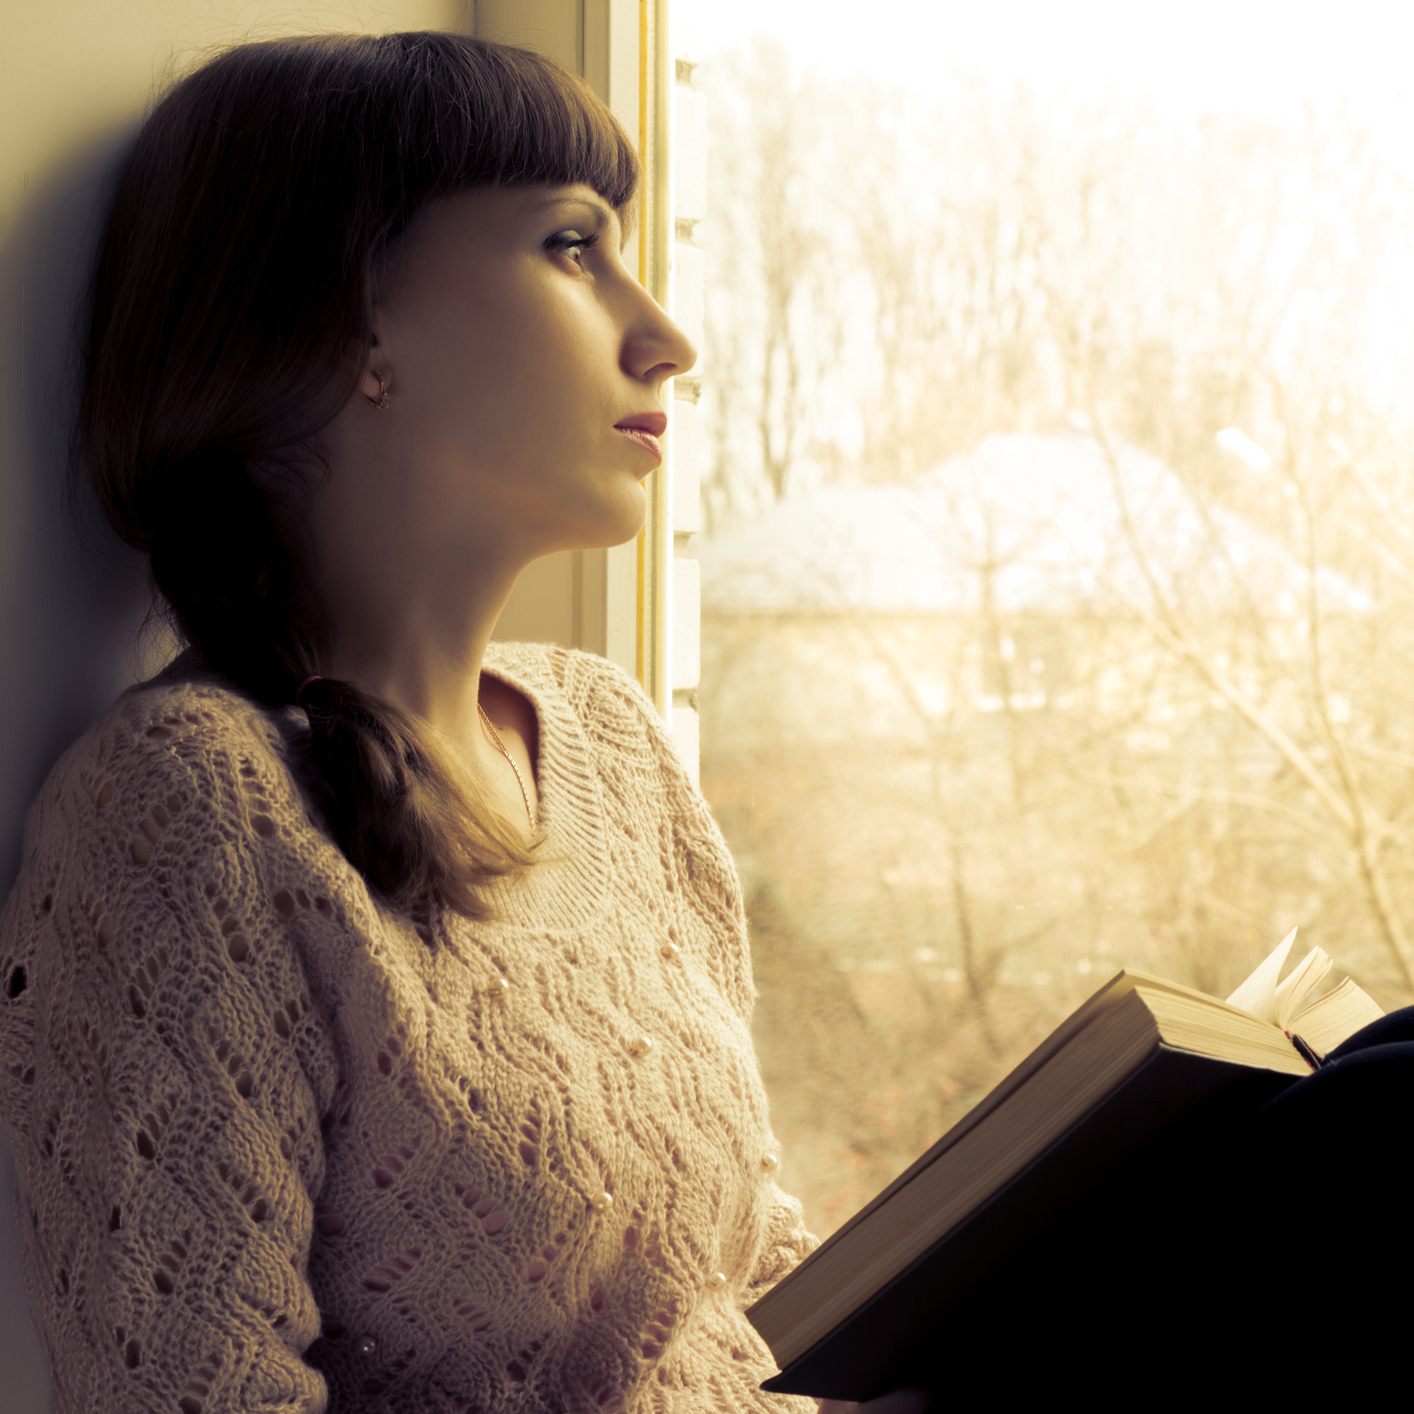 woman sitting next to a window reading a book and looking outside